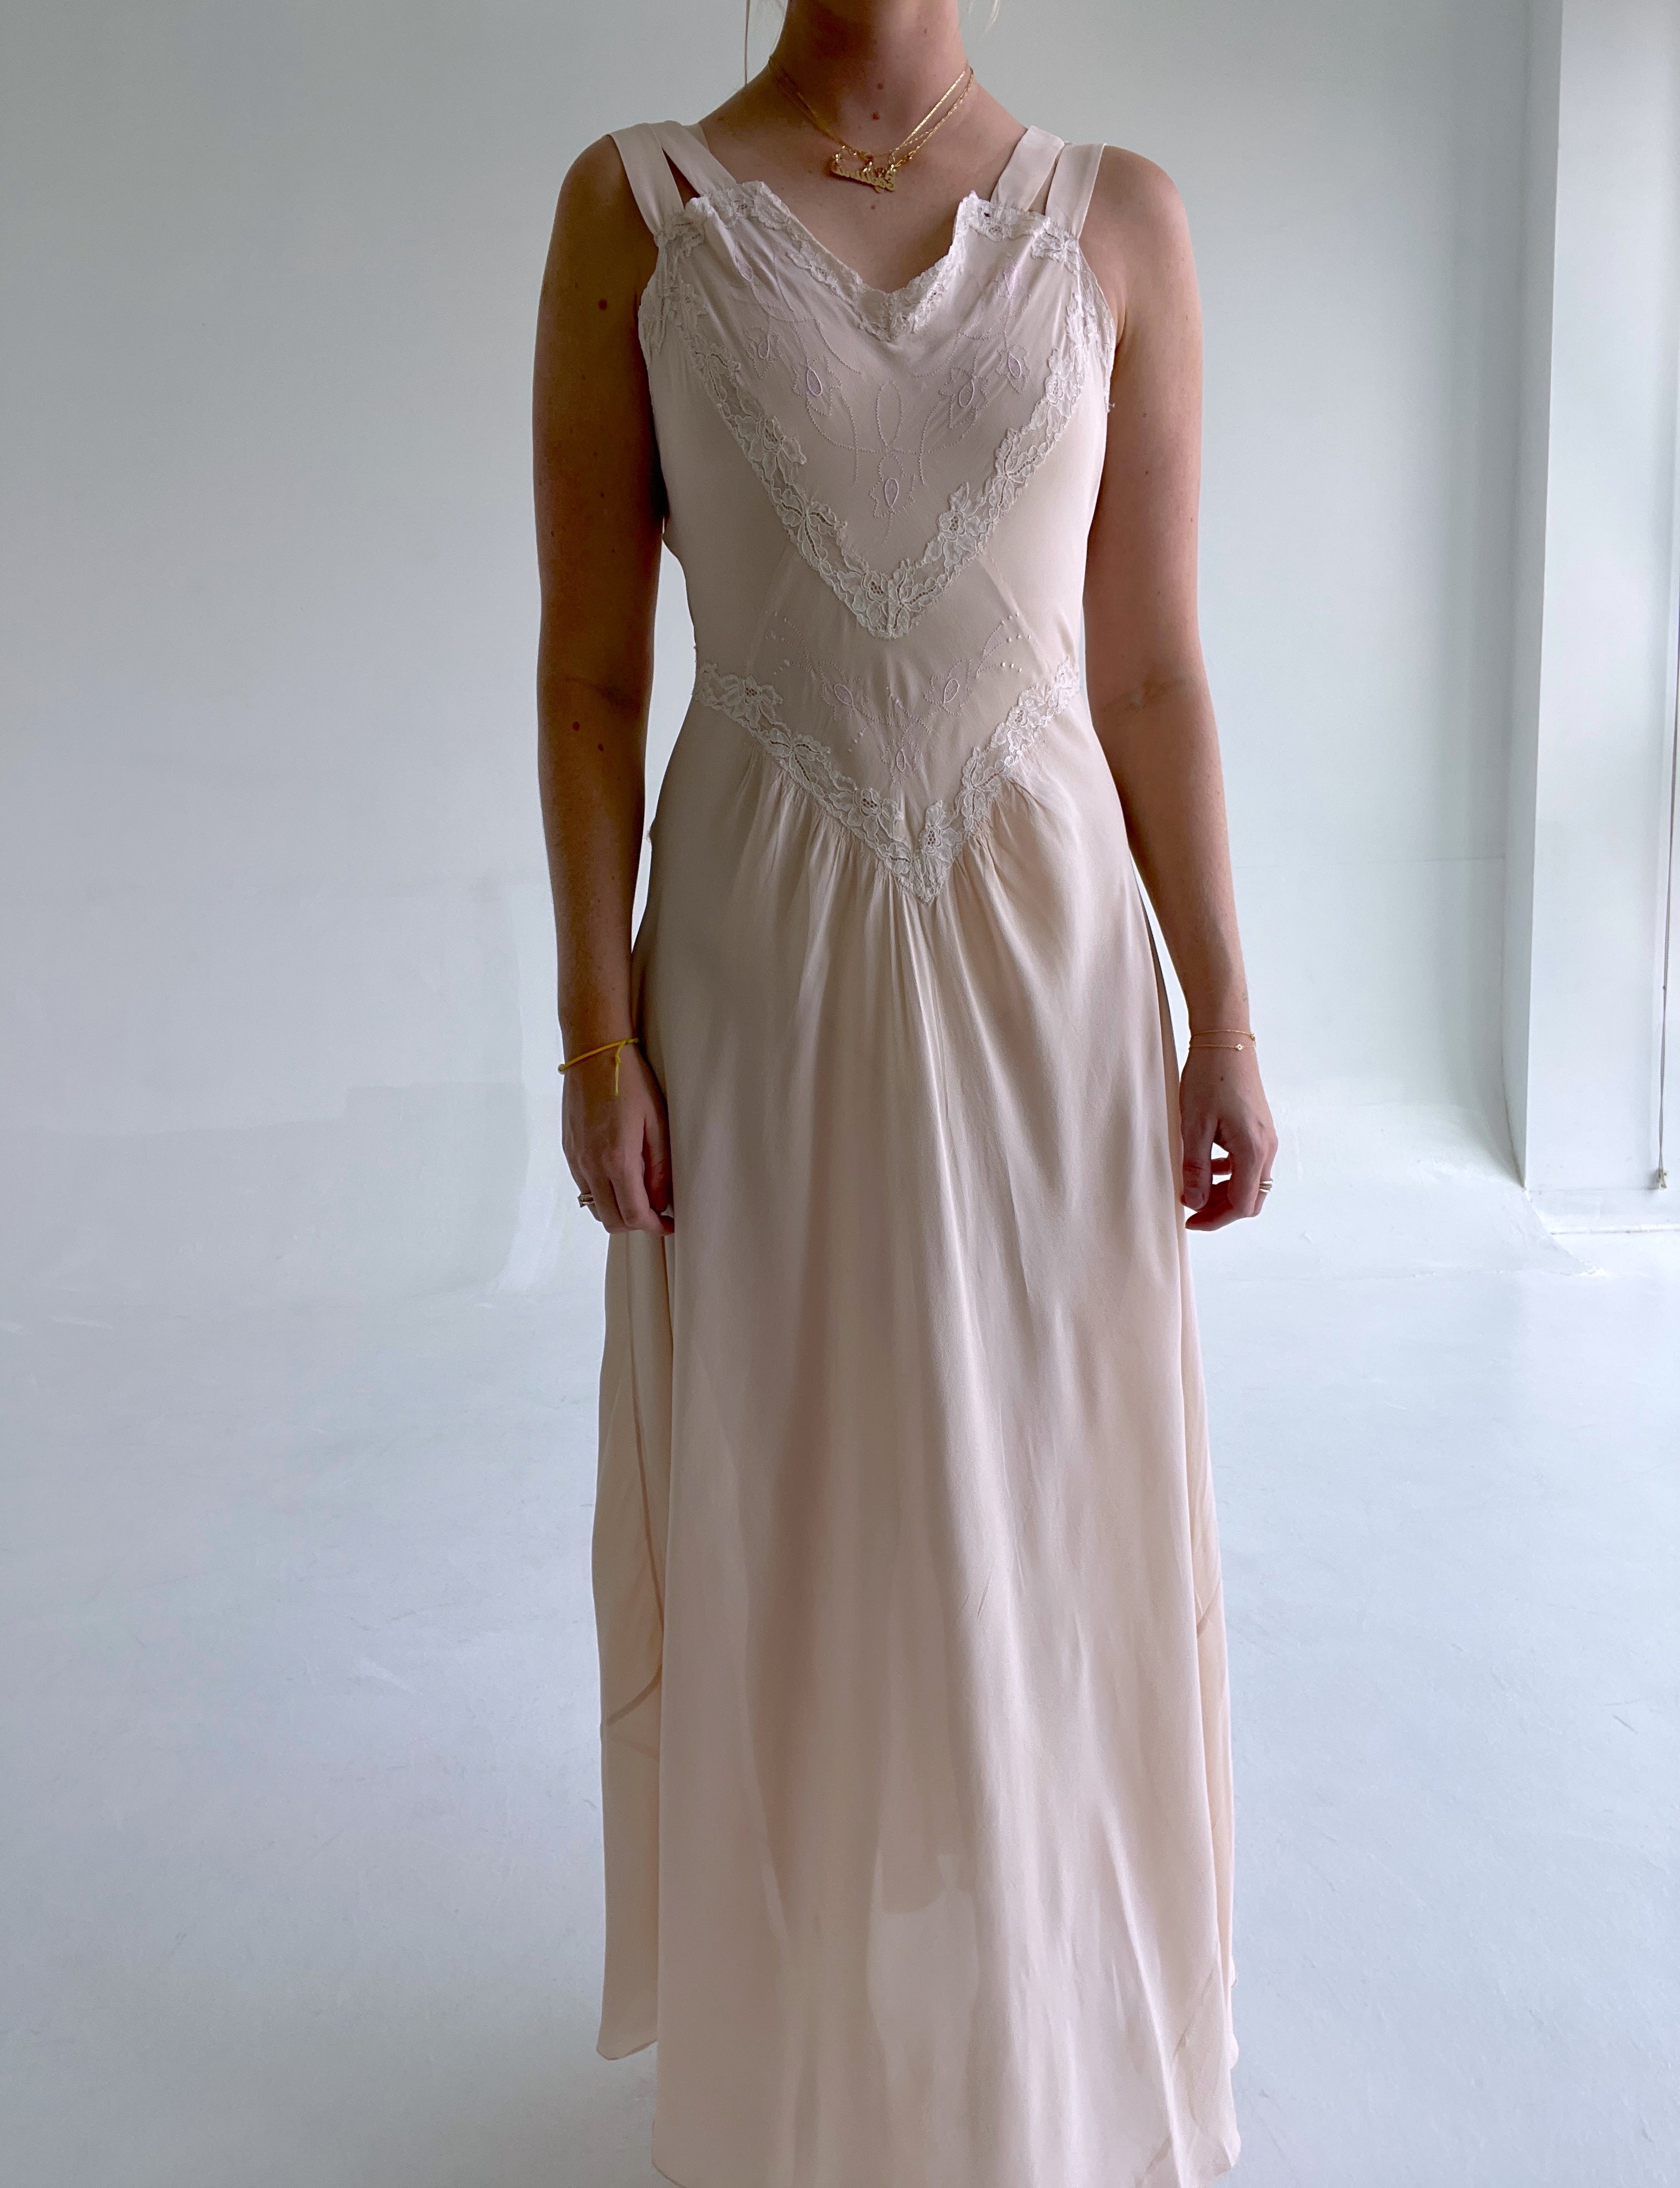 1930's Dusty Pale Pink Silk Chiffon Slip Dress with Leaf Embroidery